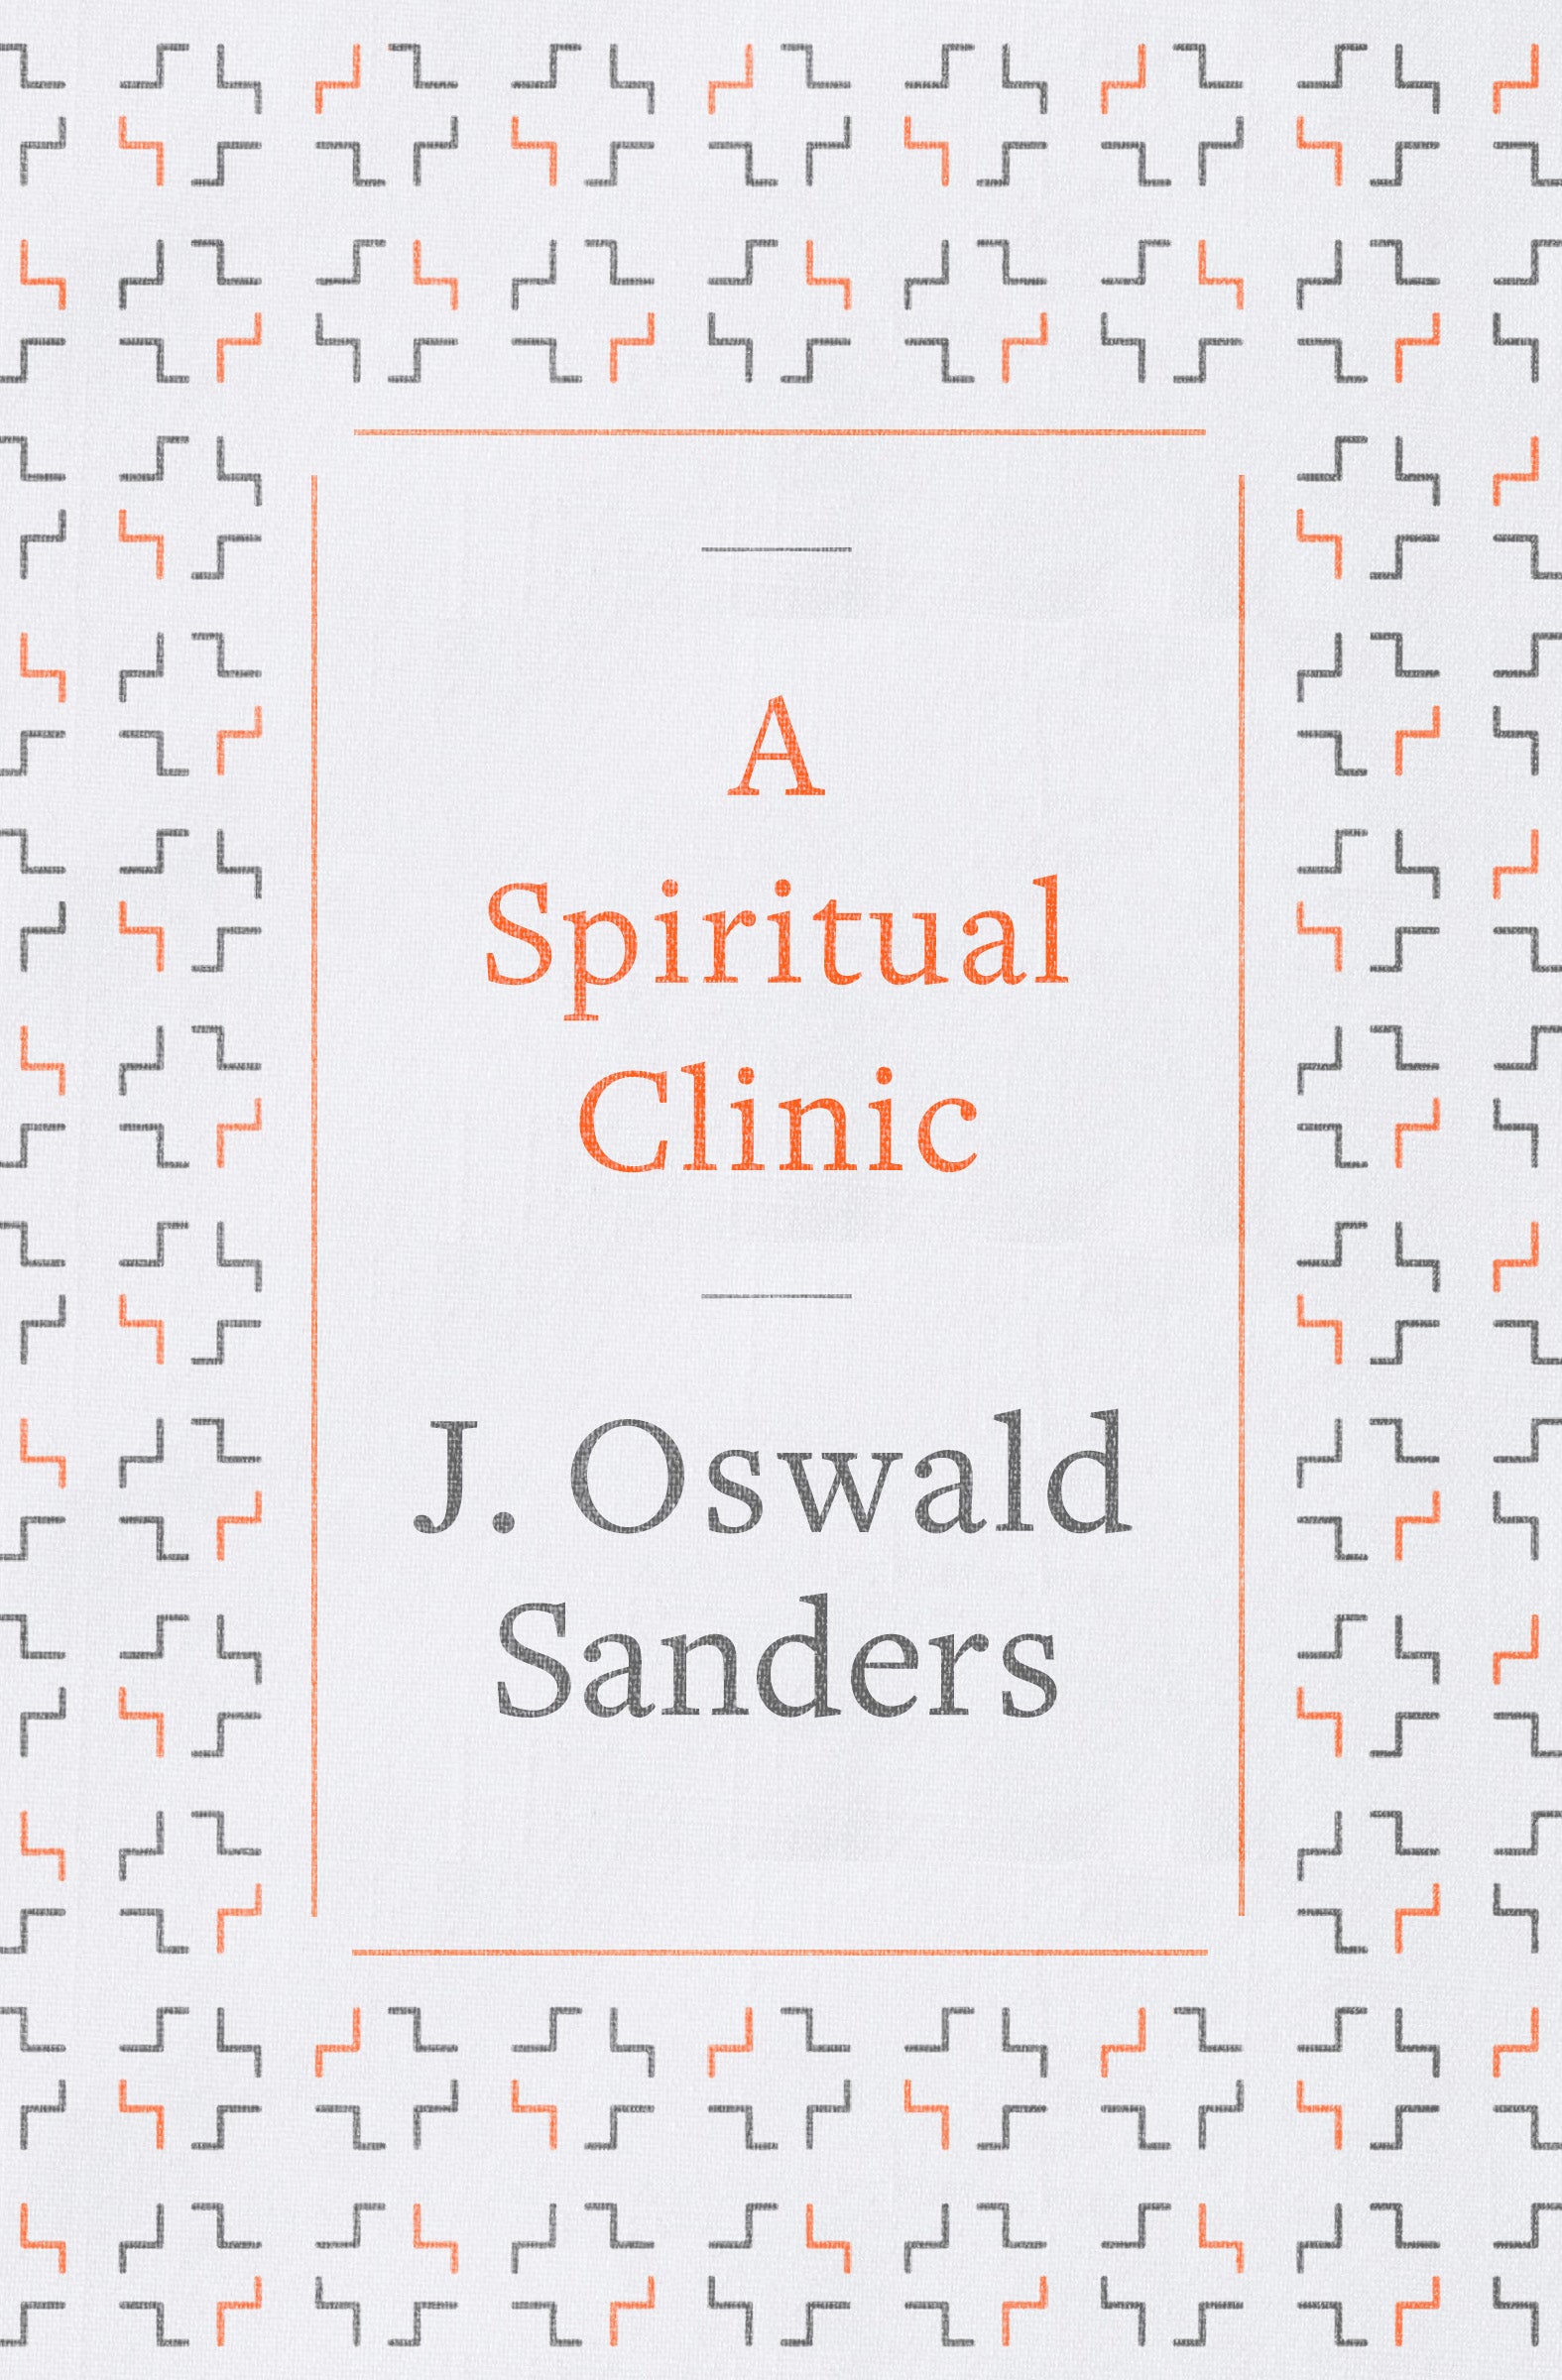 Image of Spiritual Clinic other